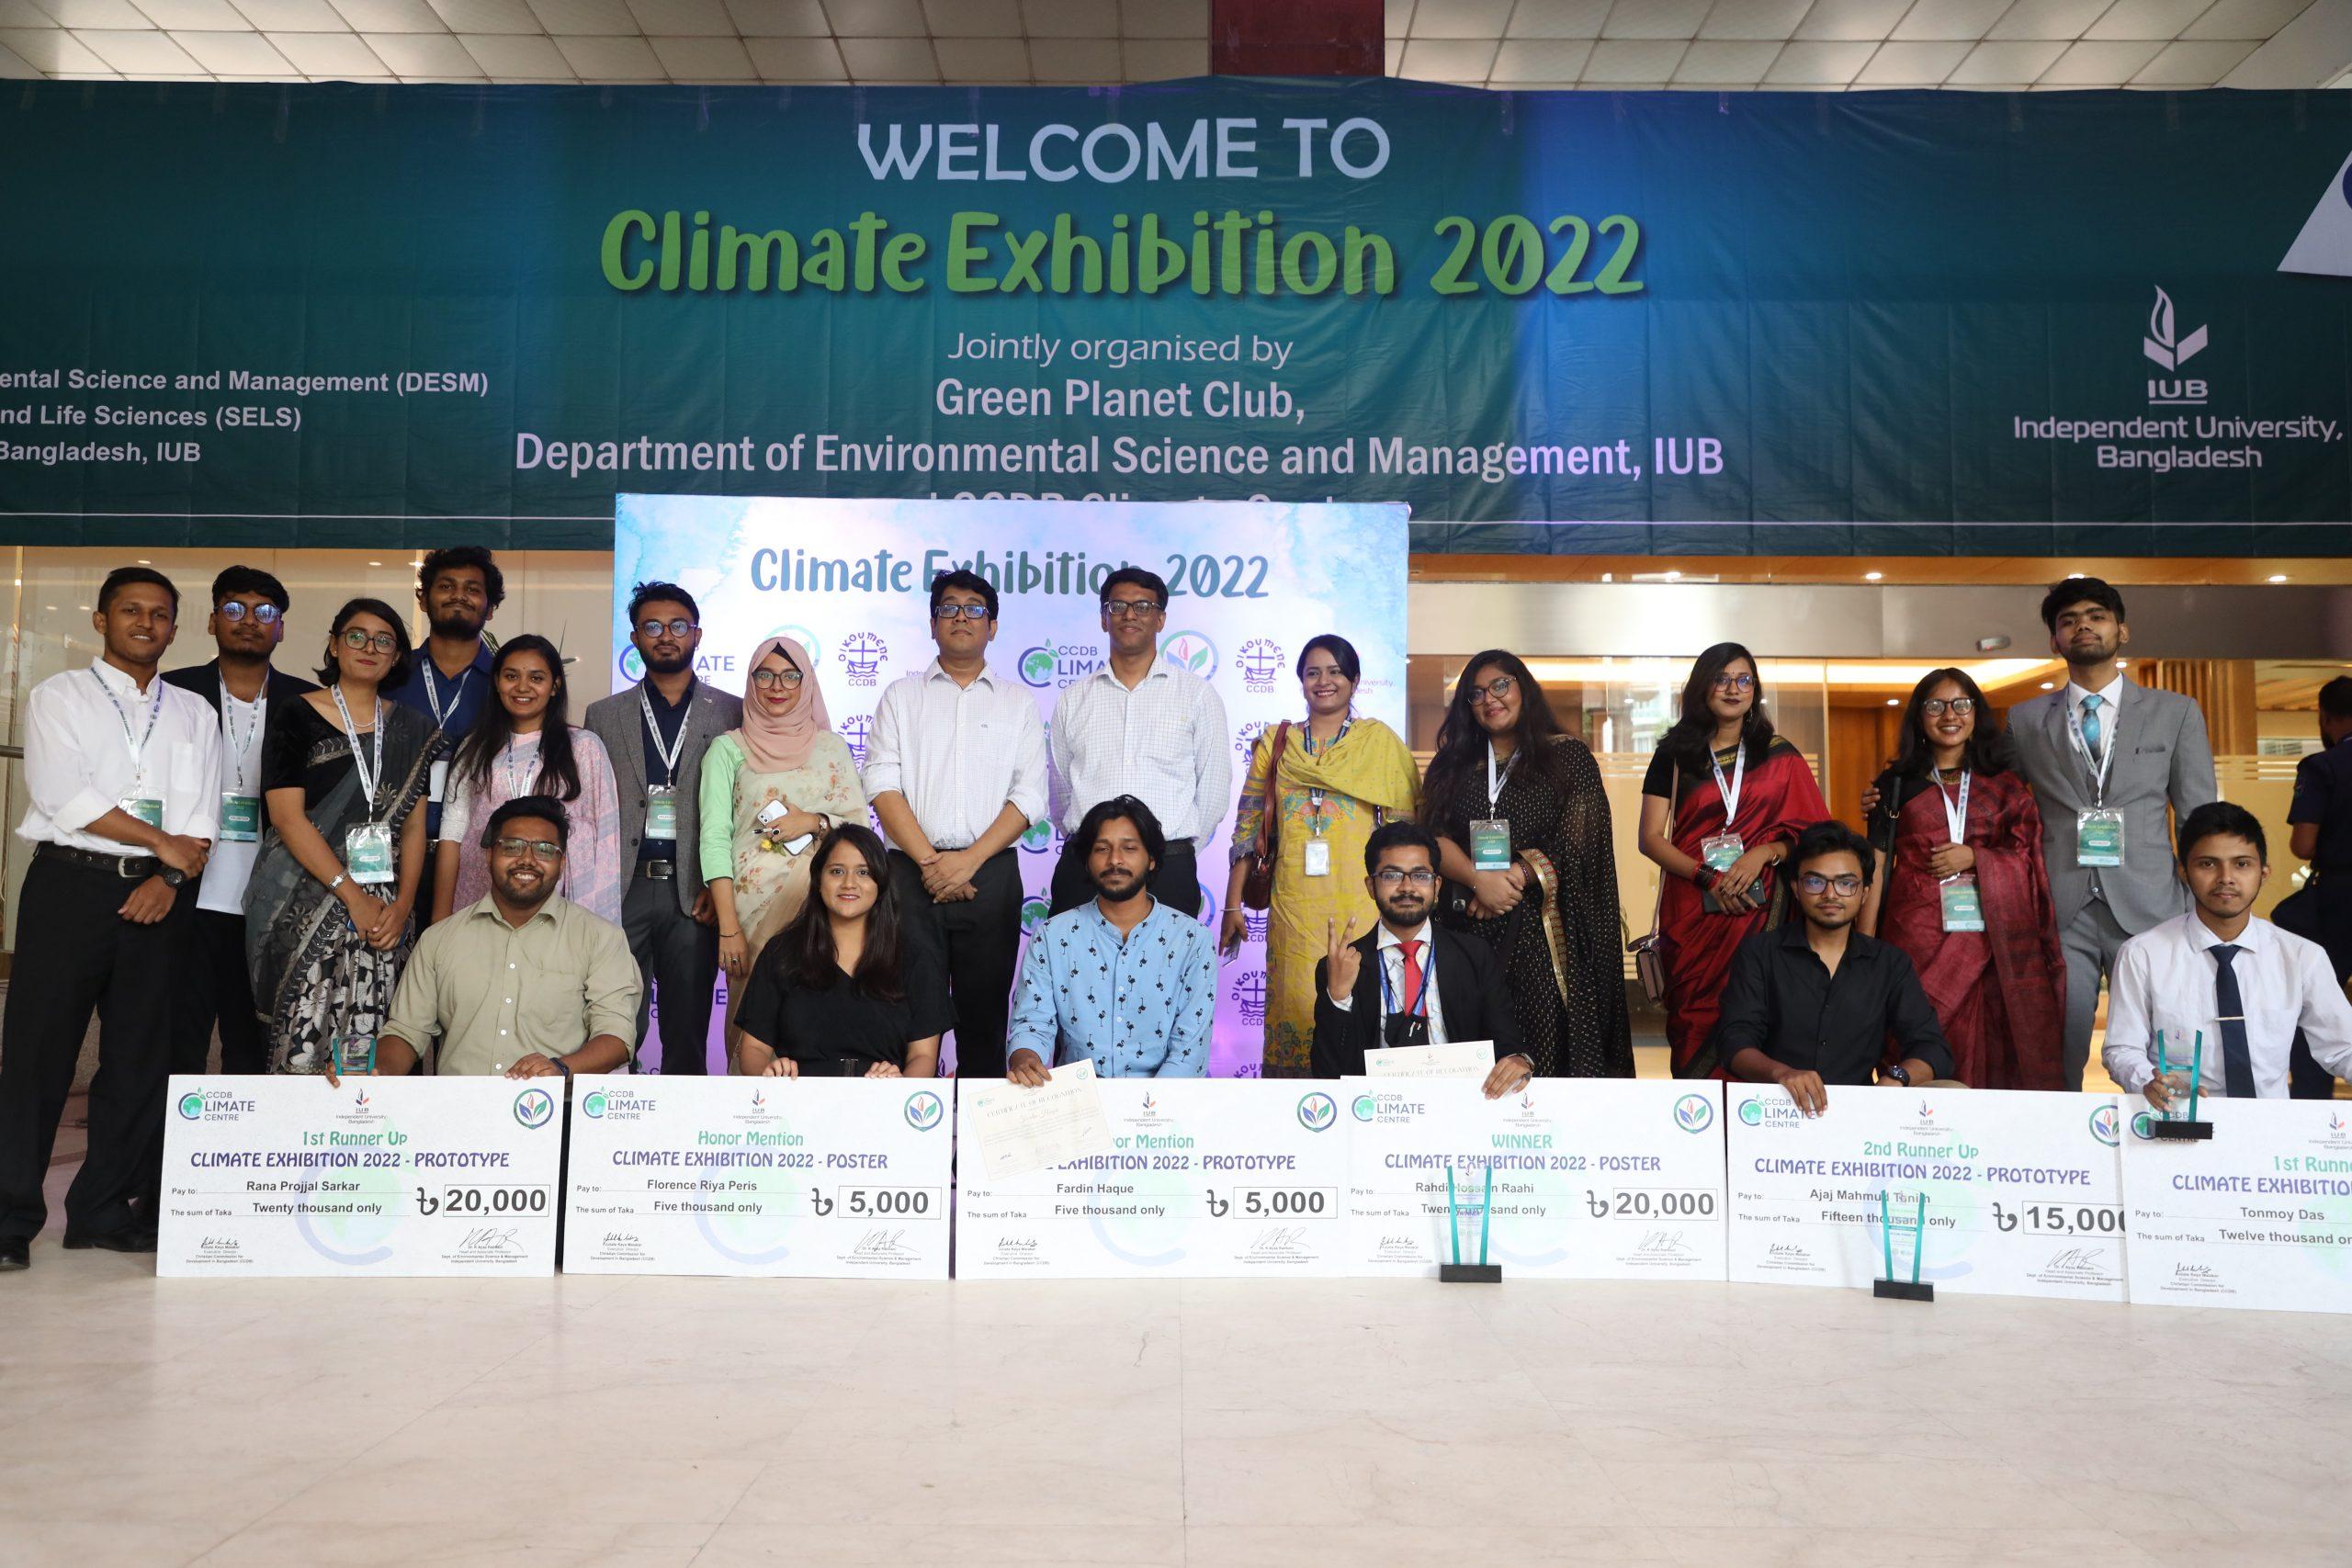 Celebration ceremony of the Climate Exhibition 2022